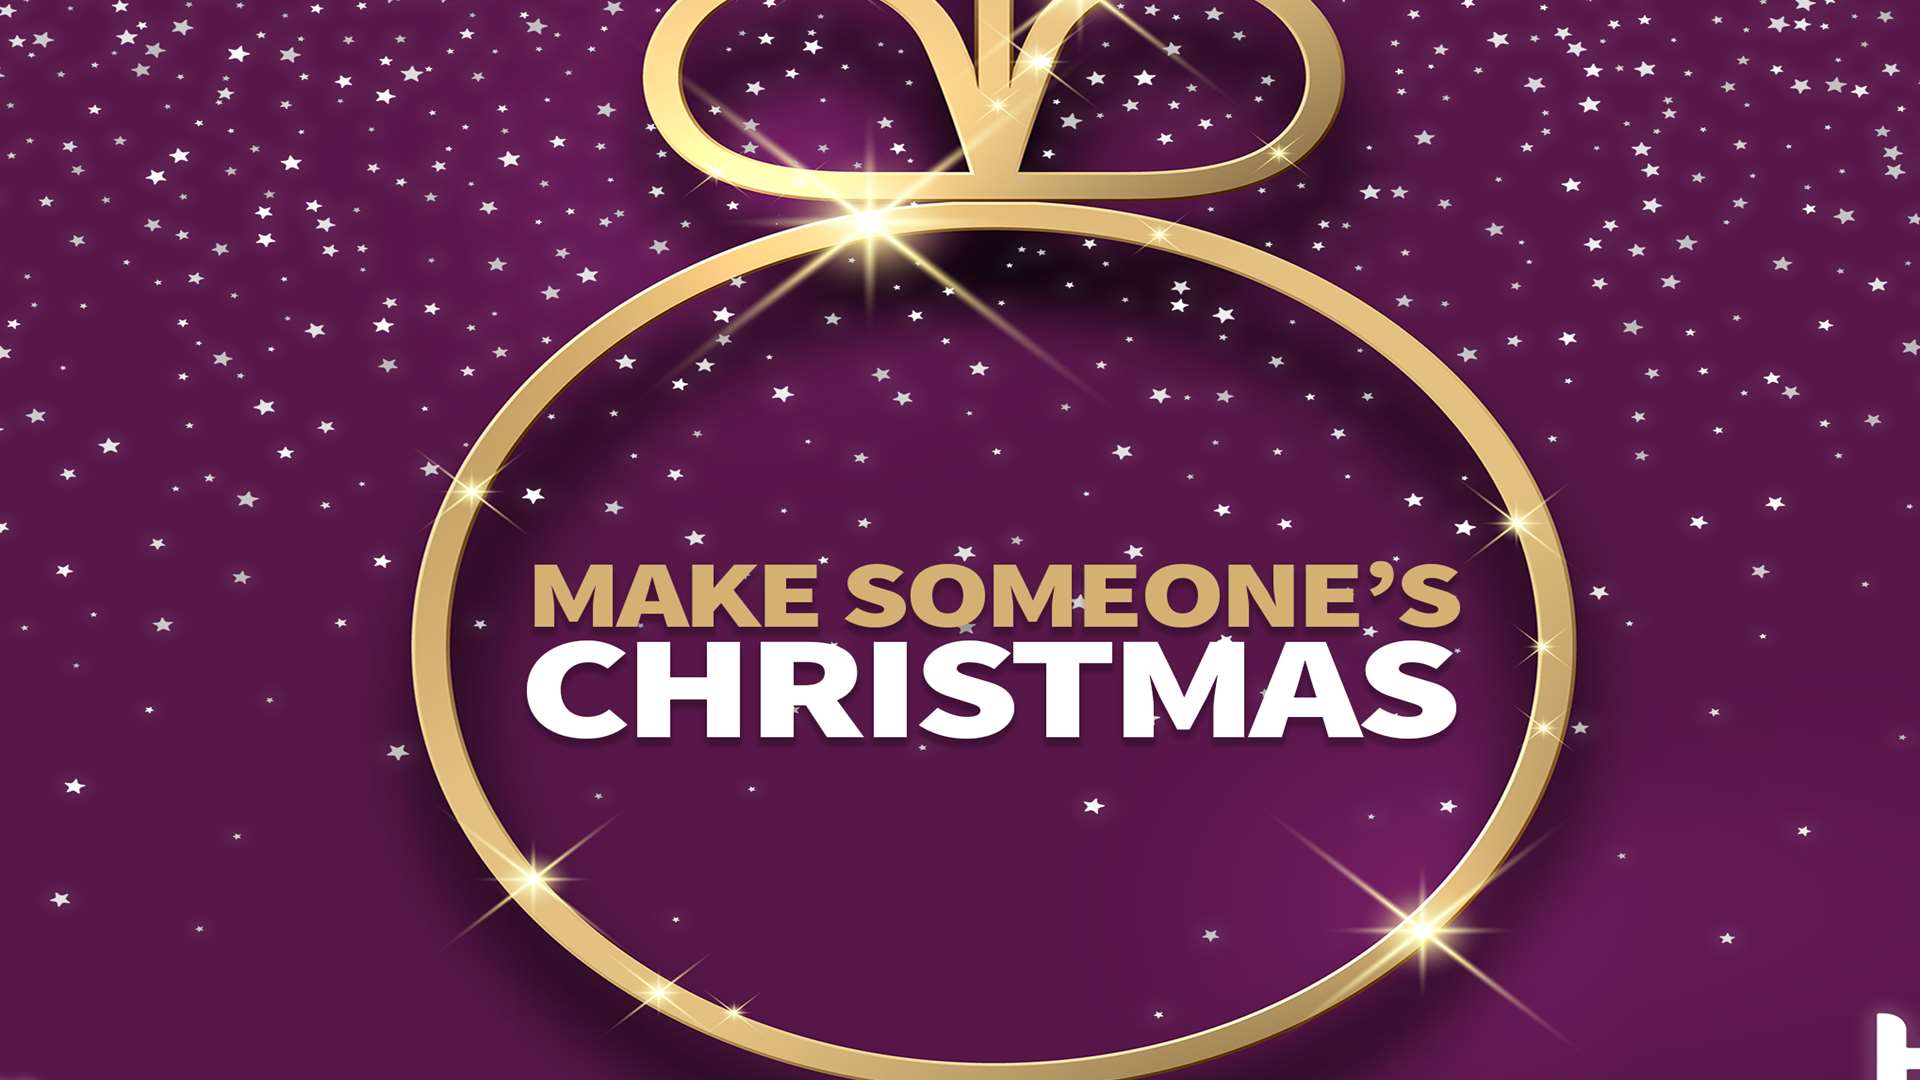 Kmfm has joined forces with Kent Reliance once again to make Christmas 2017, for a number of people in Kent, the best yet.